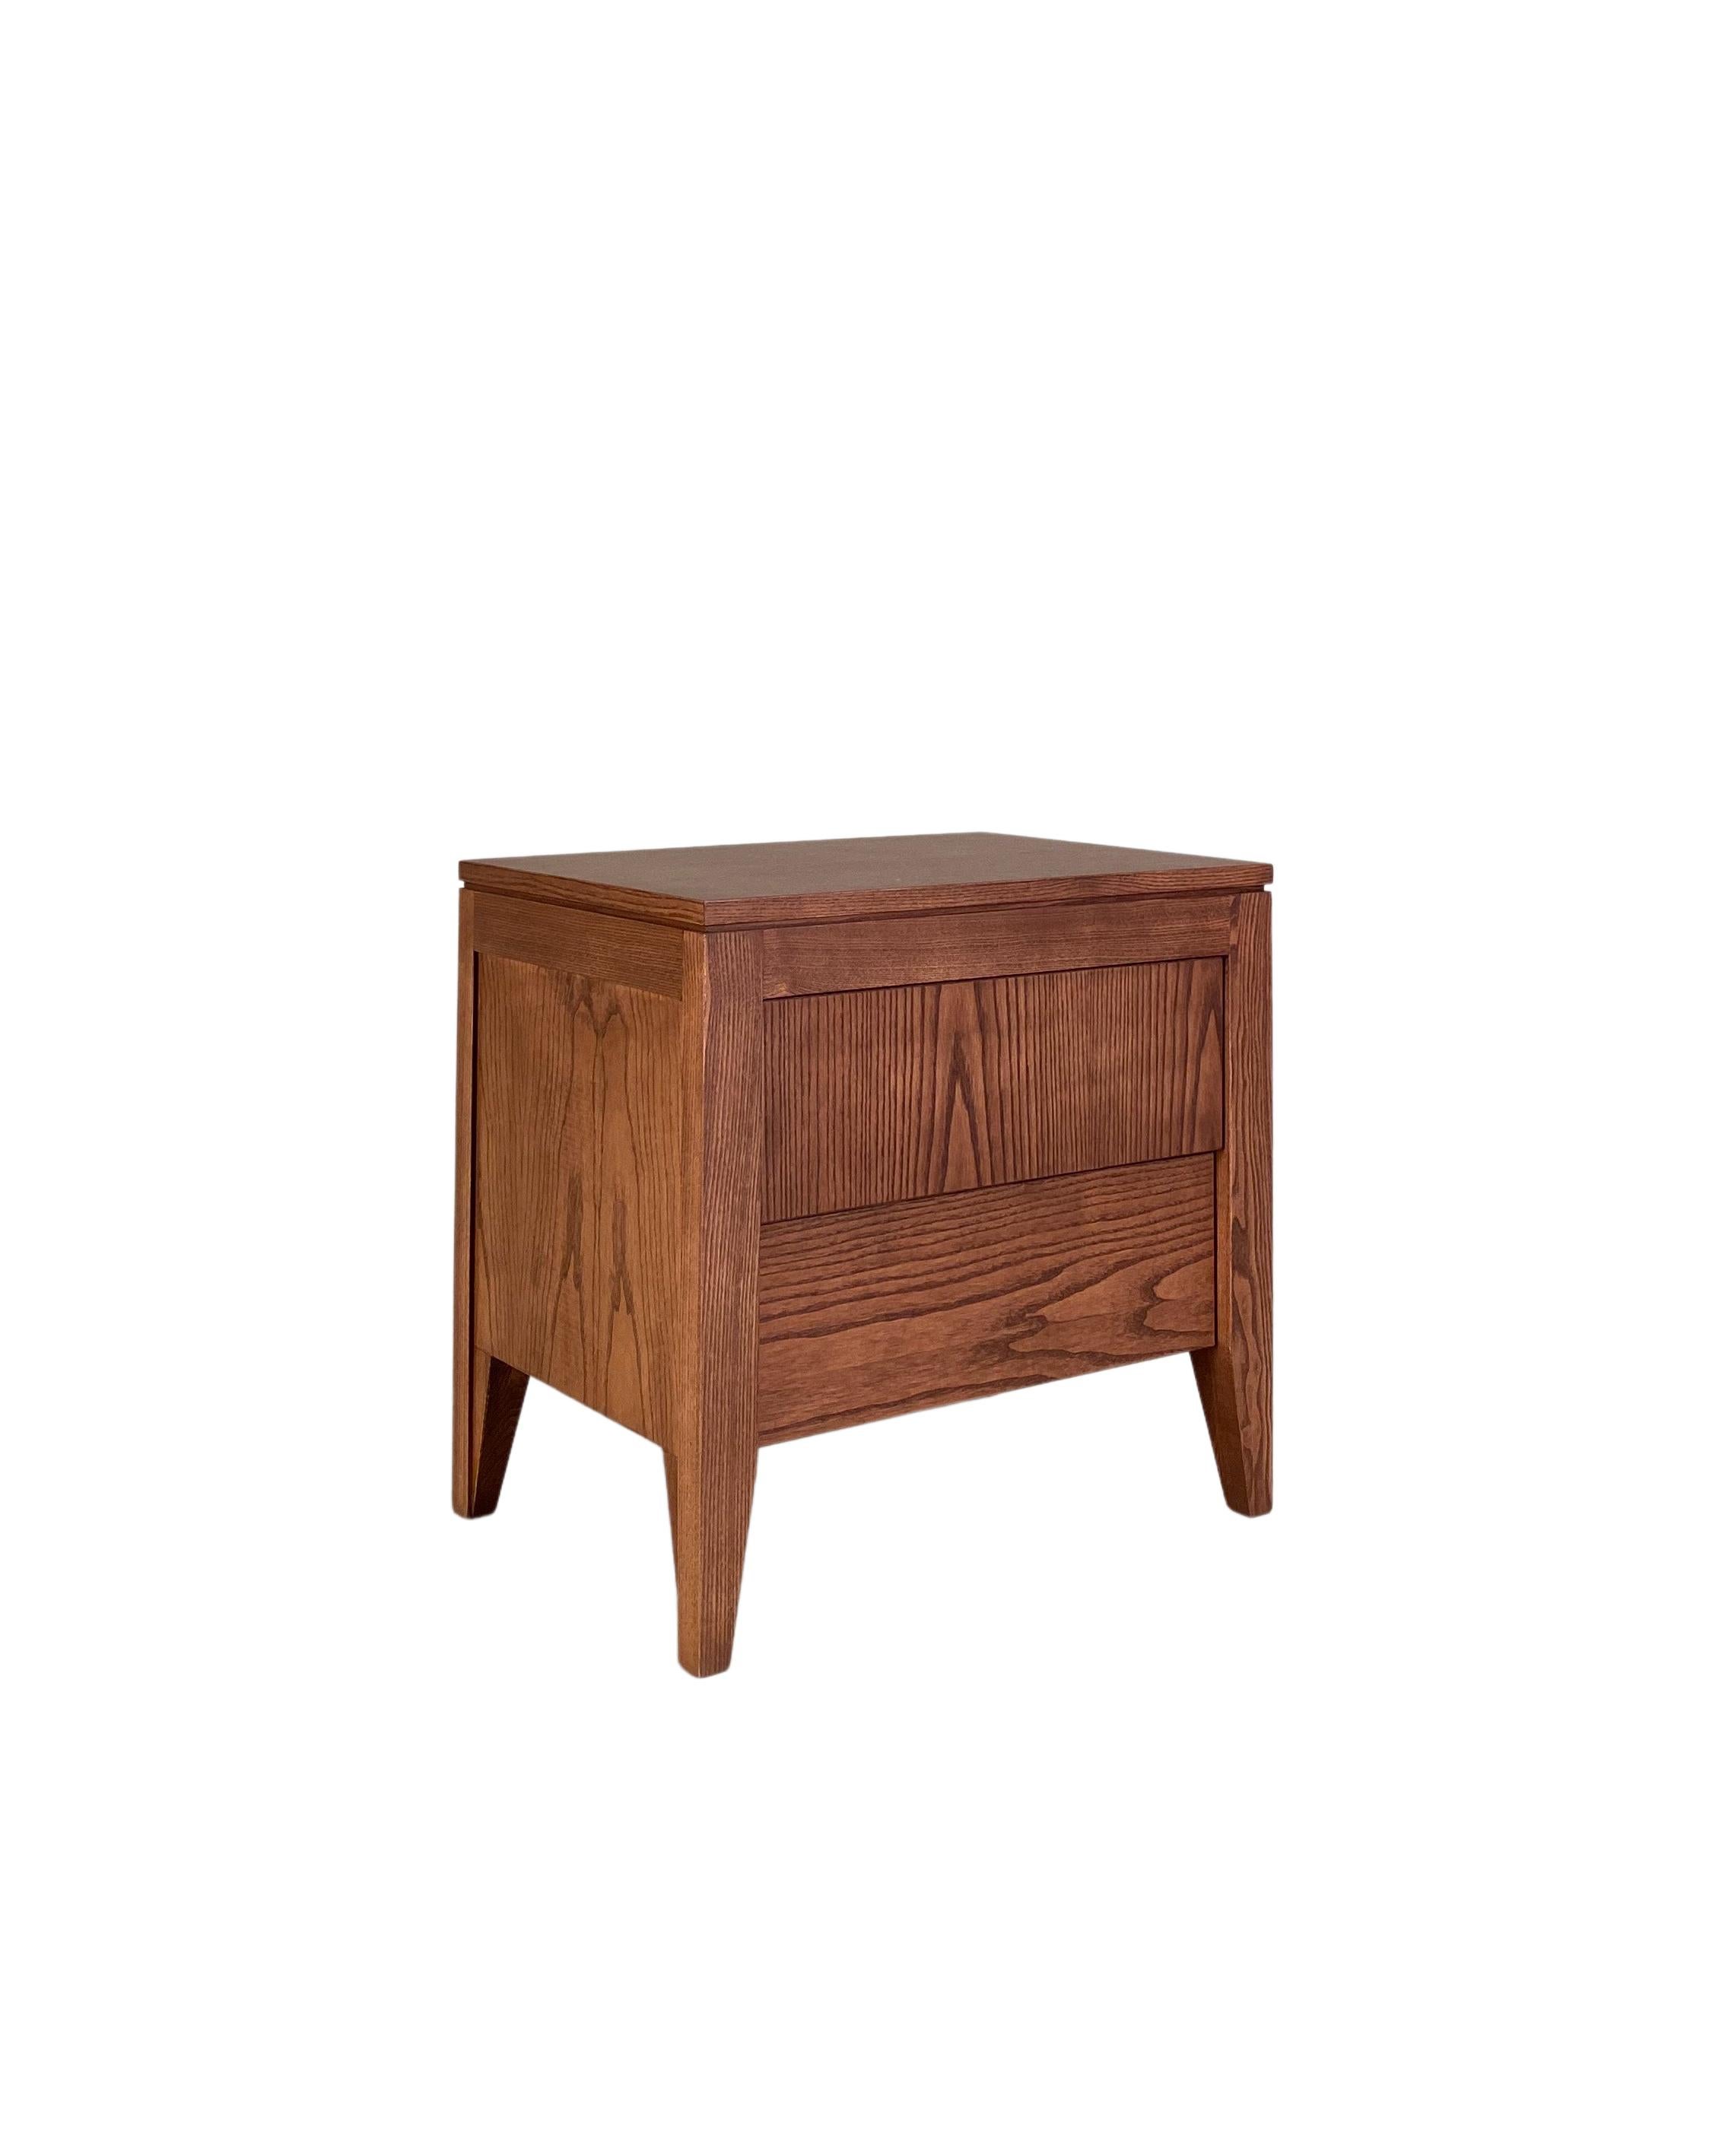 Ash Anerio Bedside Table, Made of Canaletto Walnut Wood For Sale